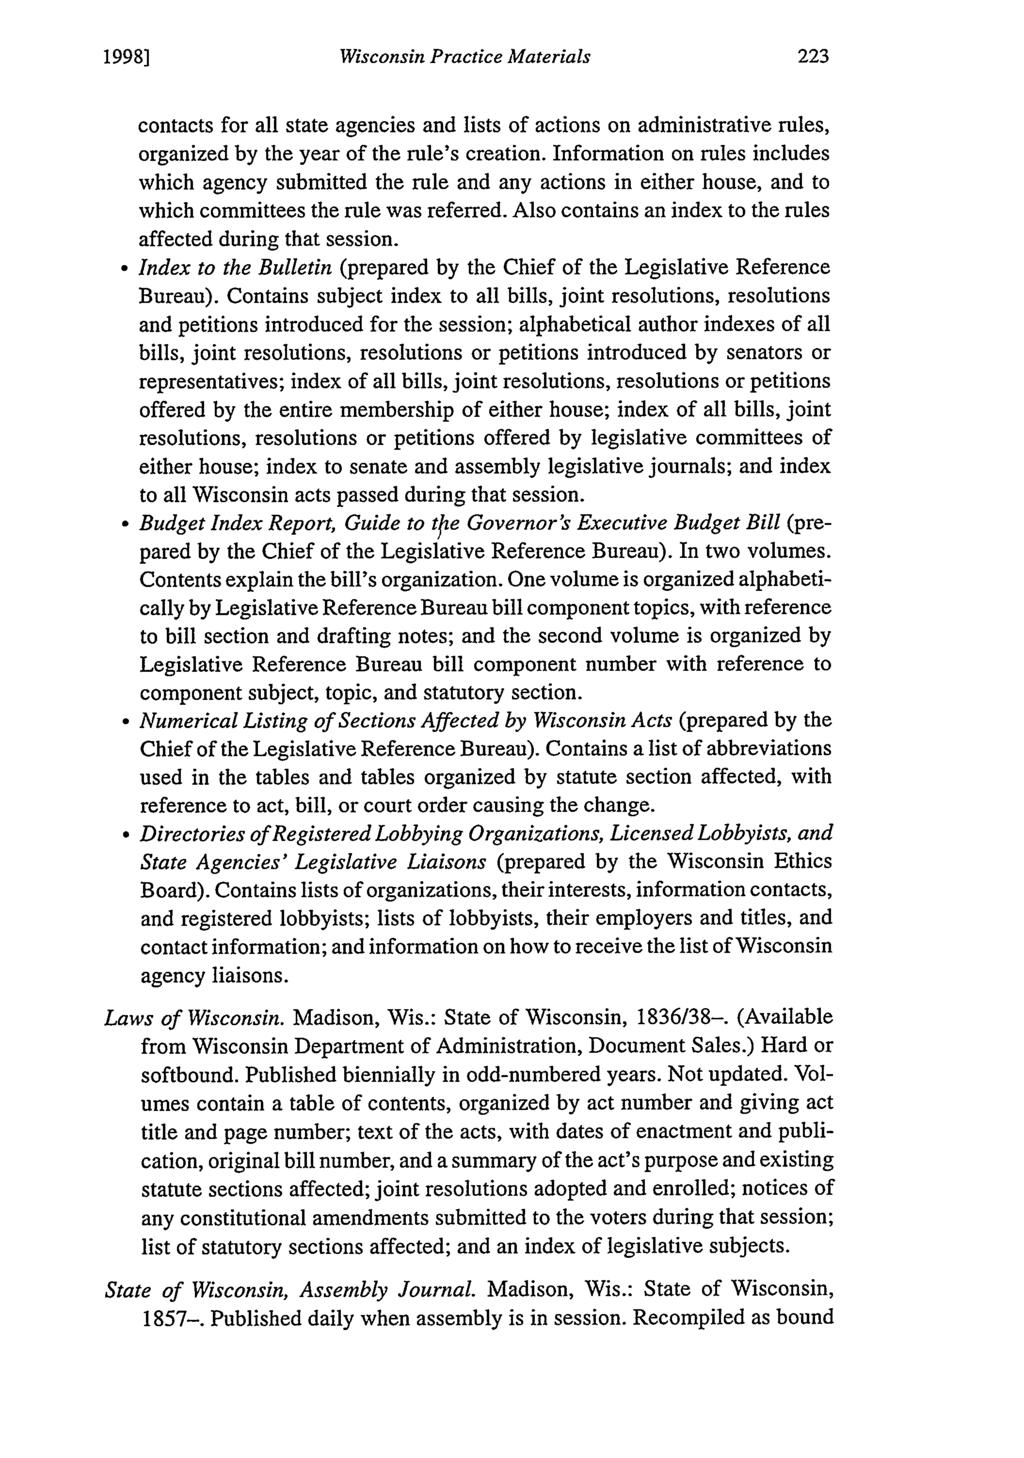 1998] Wisconsin Practice Materials contacts for all state agencies and lists of actions on administrative rules, organized by the year of the rule's creation.